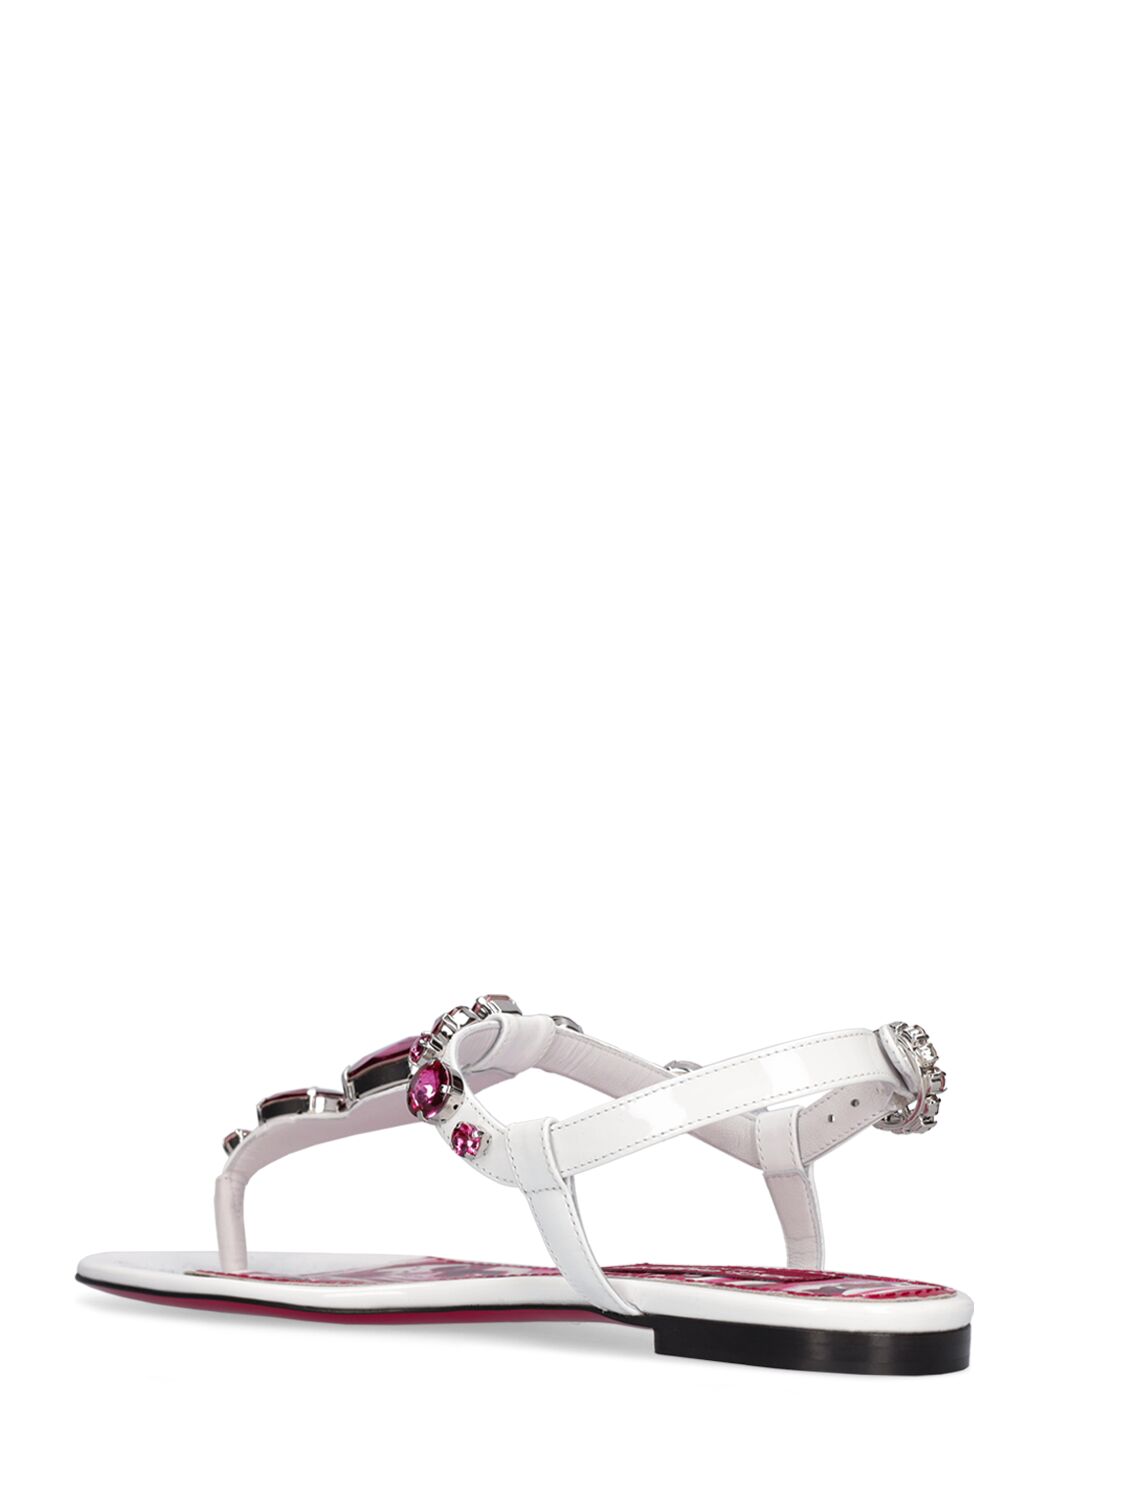 Shop Dolce & Gabbana 10mm Patent Leather Thong Sandals In White,fuchsia